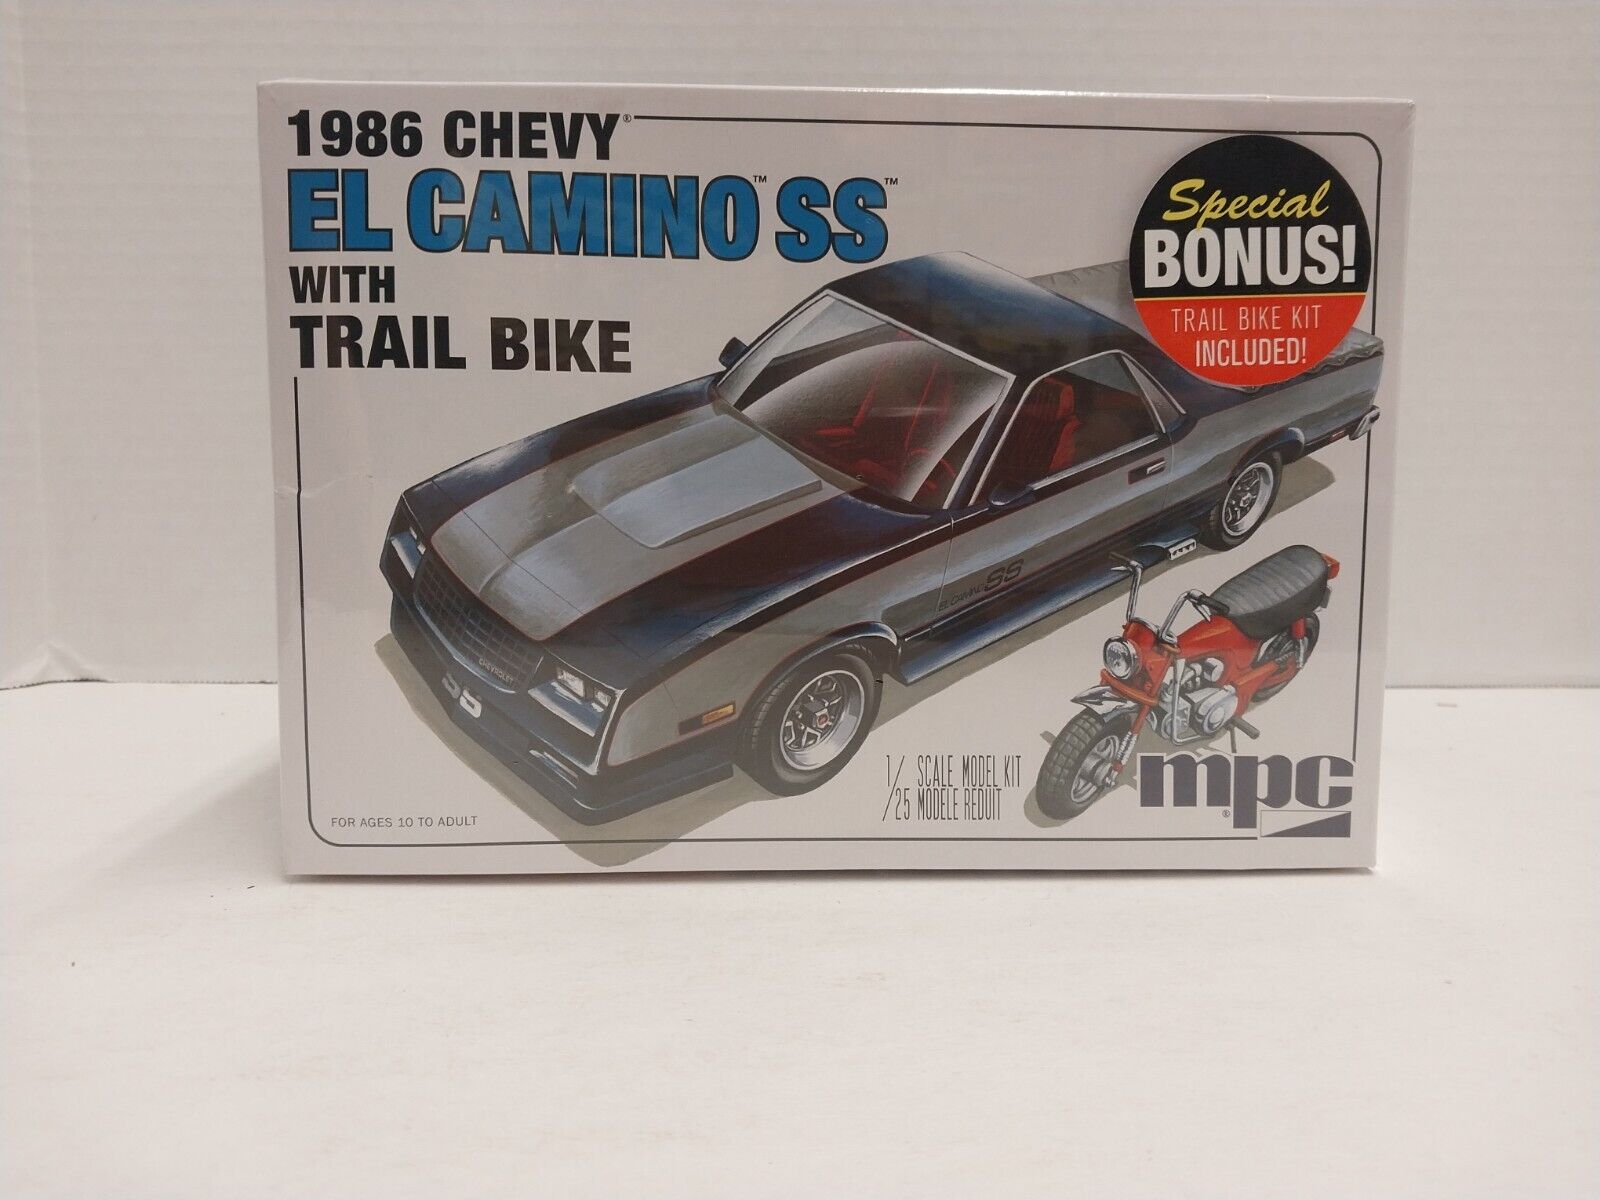 MPC 888 1:25 1986 Chevy El Camino SS with Trail Bike Model Kit Factory Sealed 